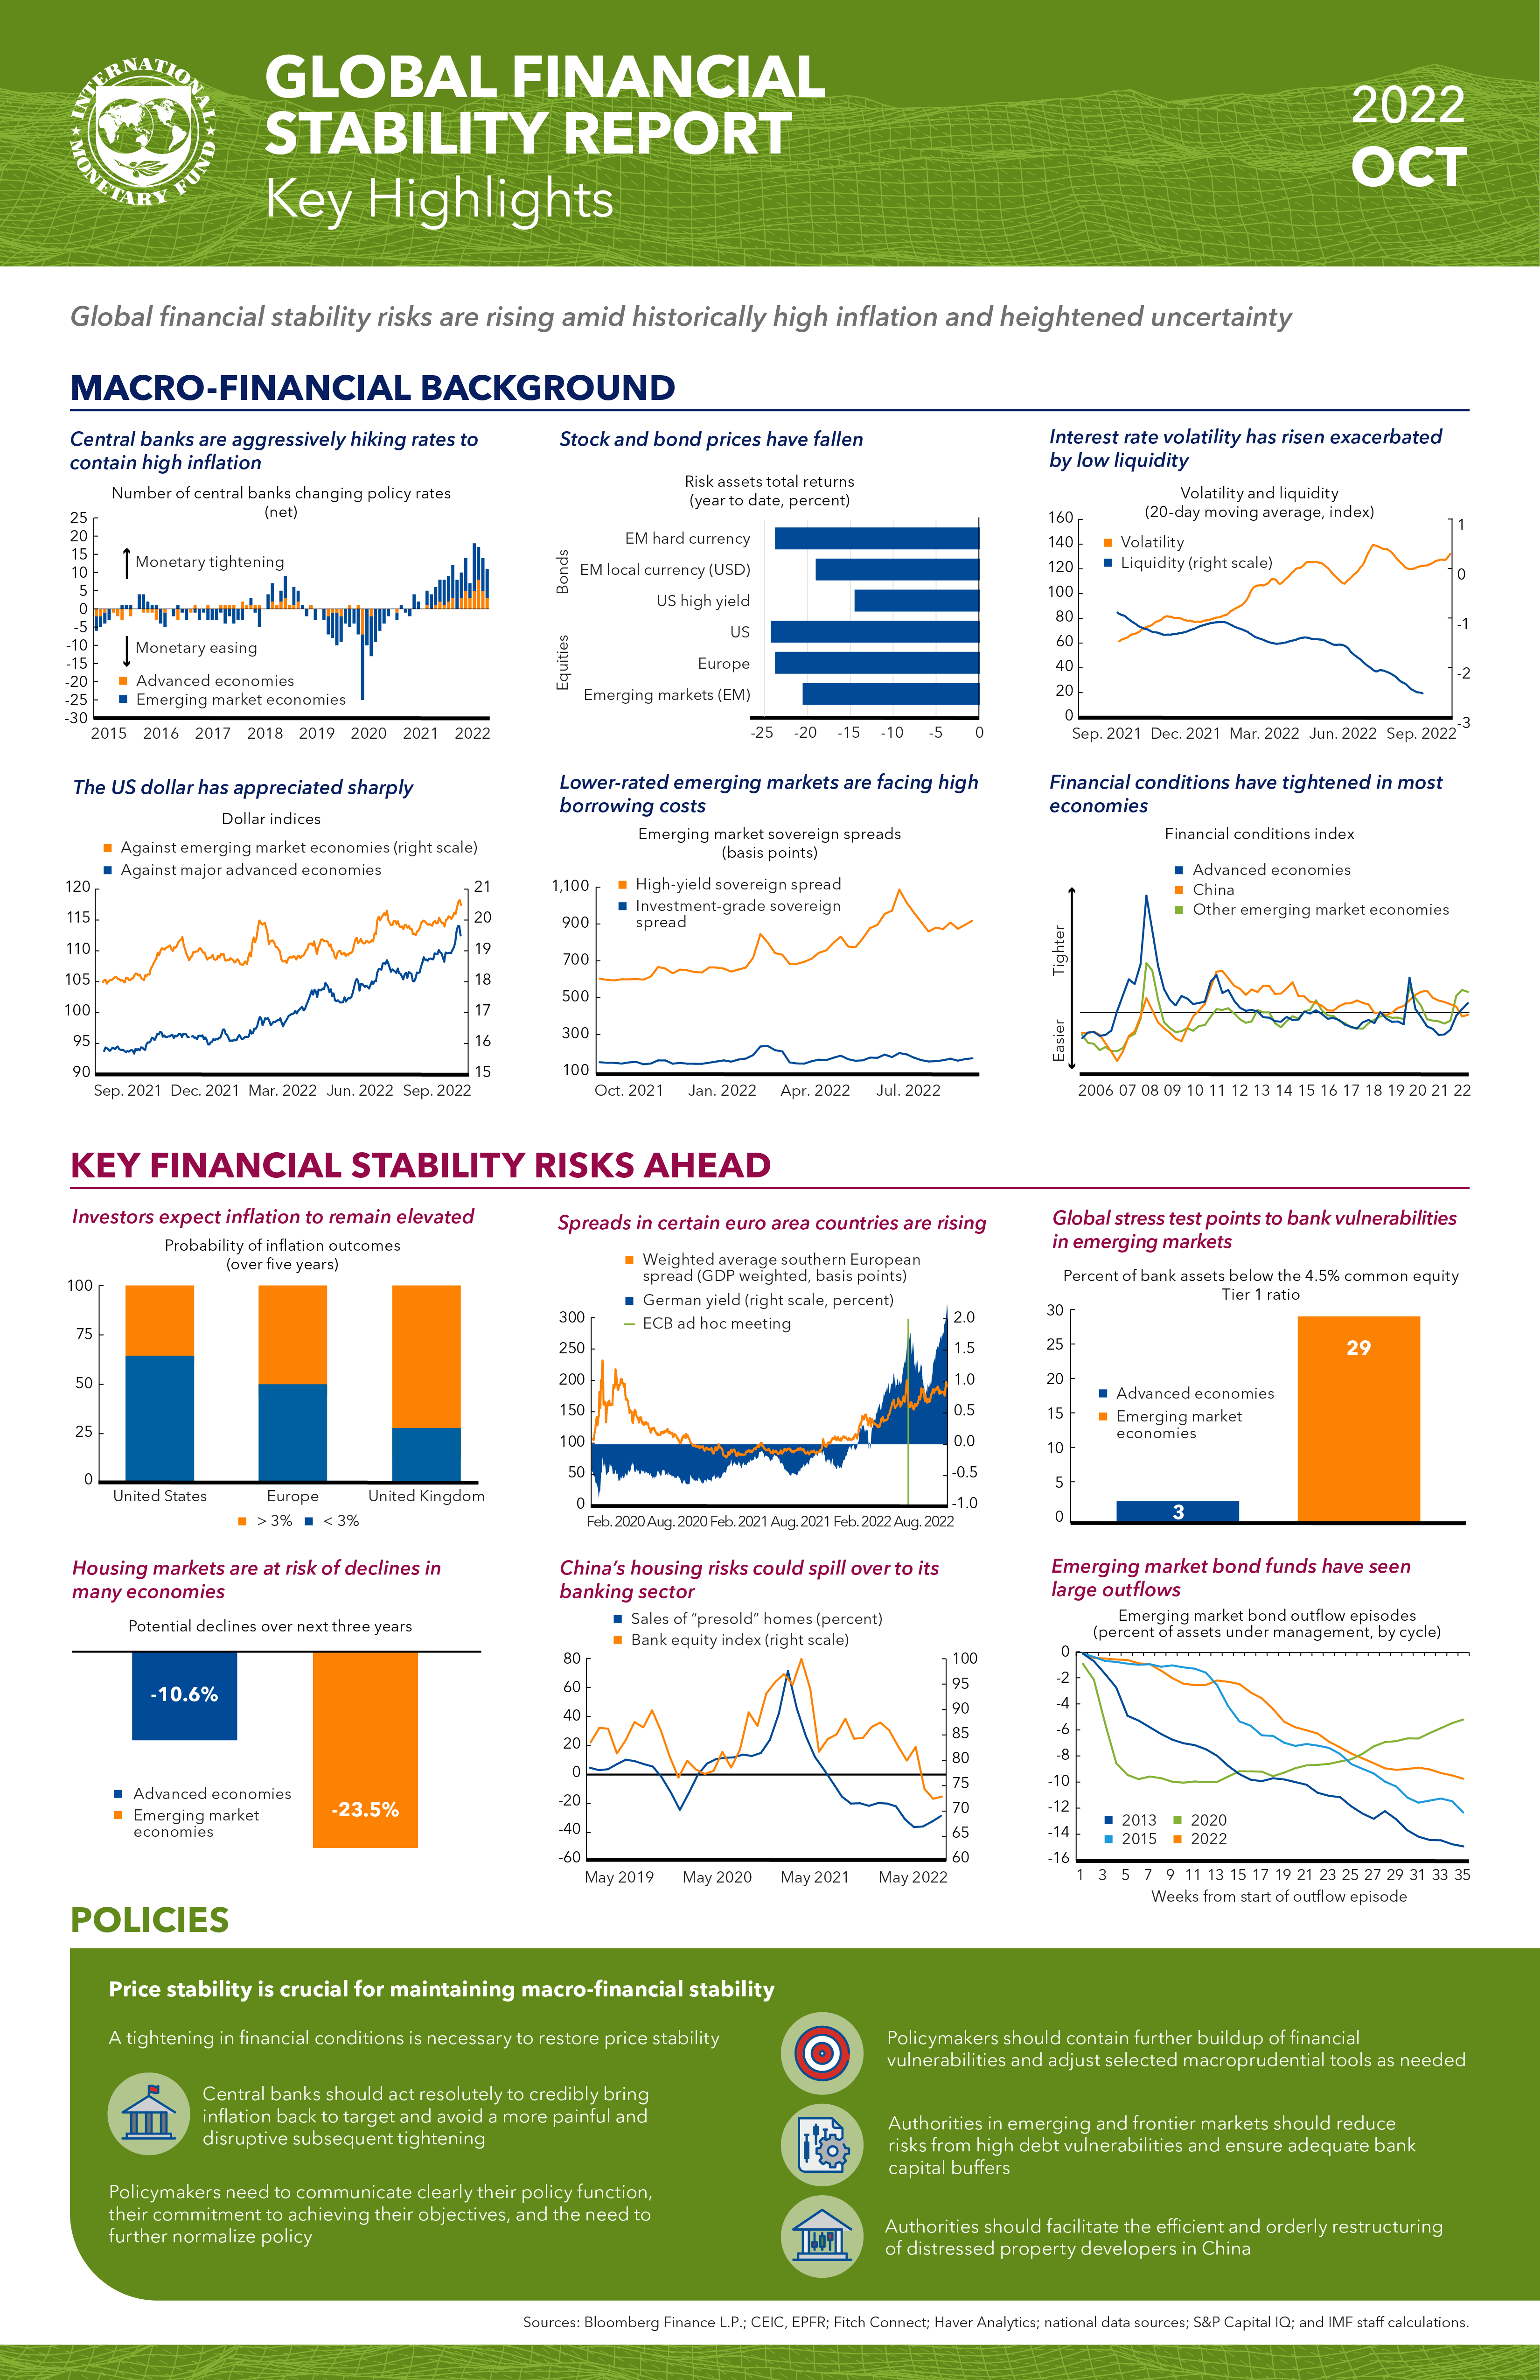 Global Financial Stability Report, October 2022